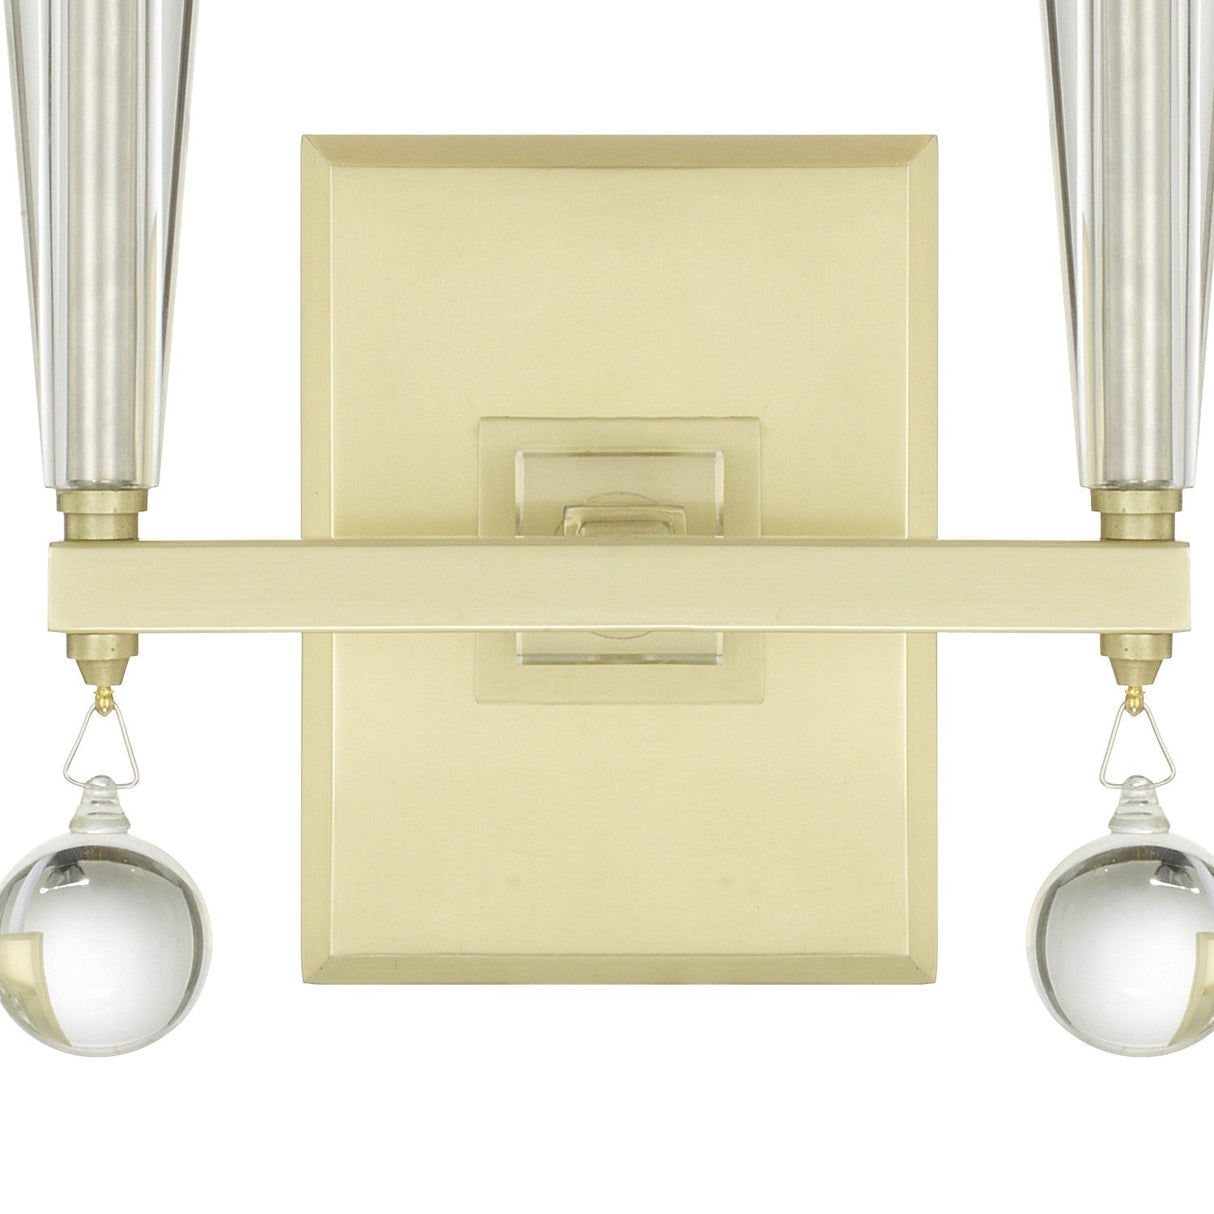 Paxton 2 Light Aged Brass Sconce 8102-AG